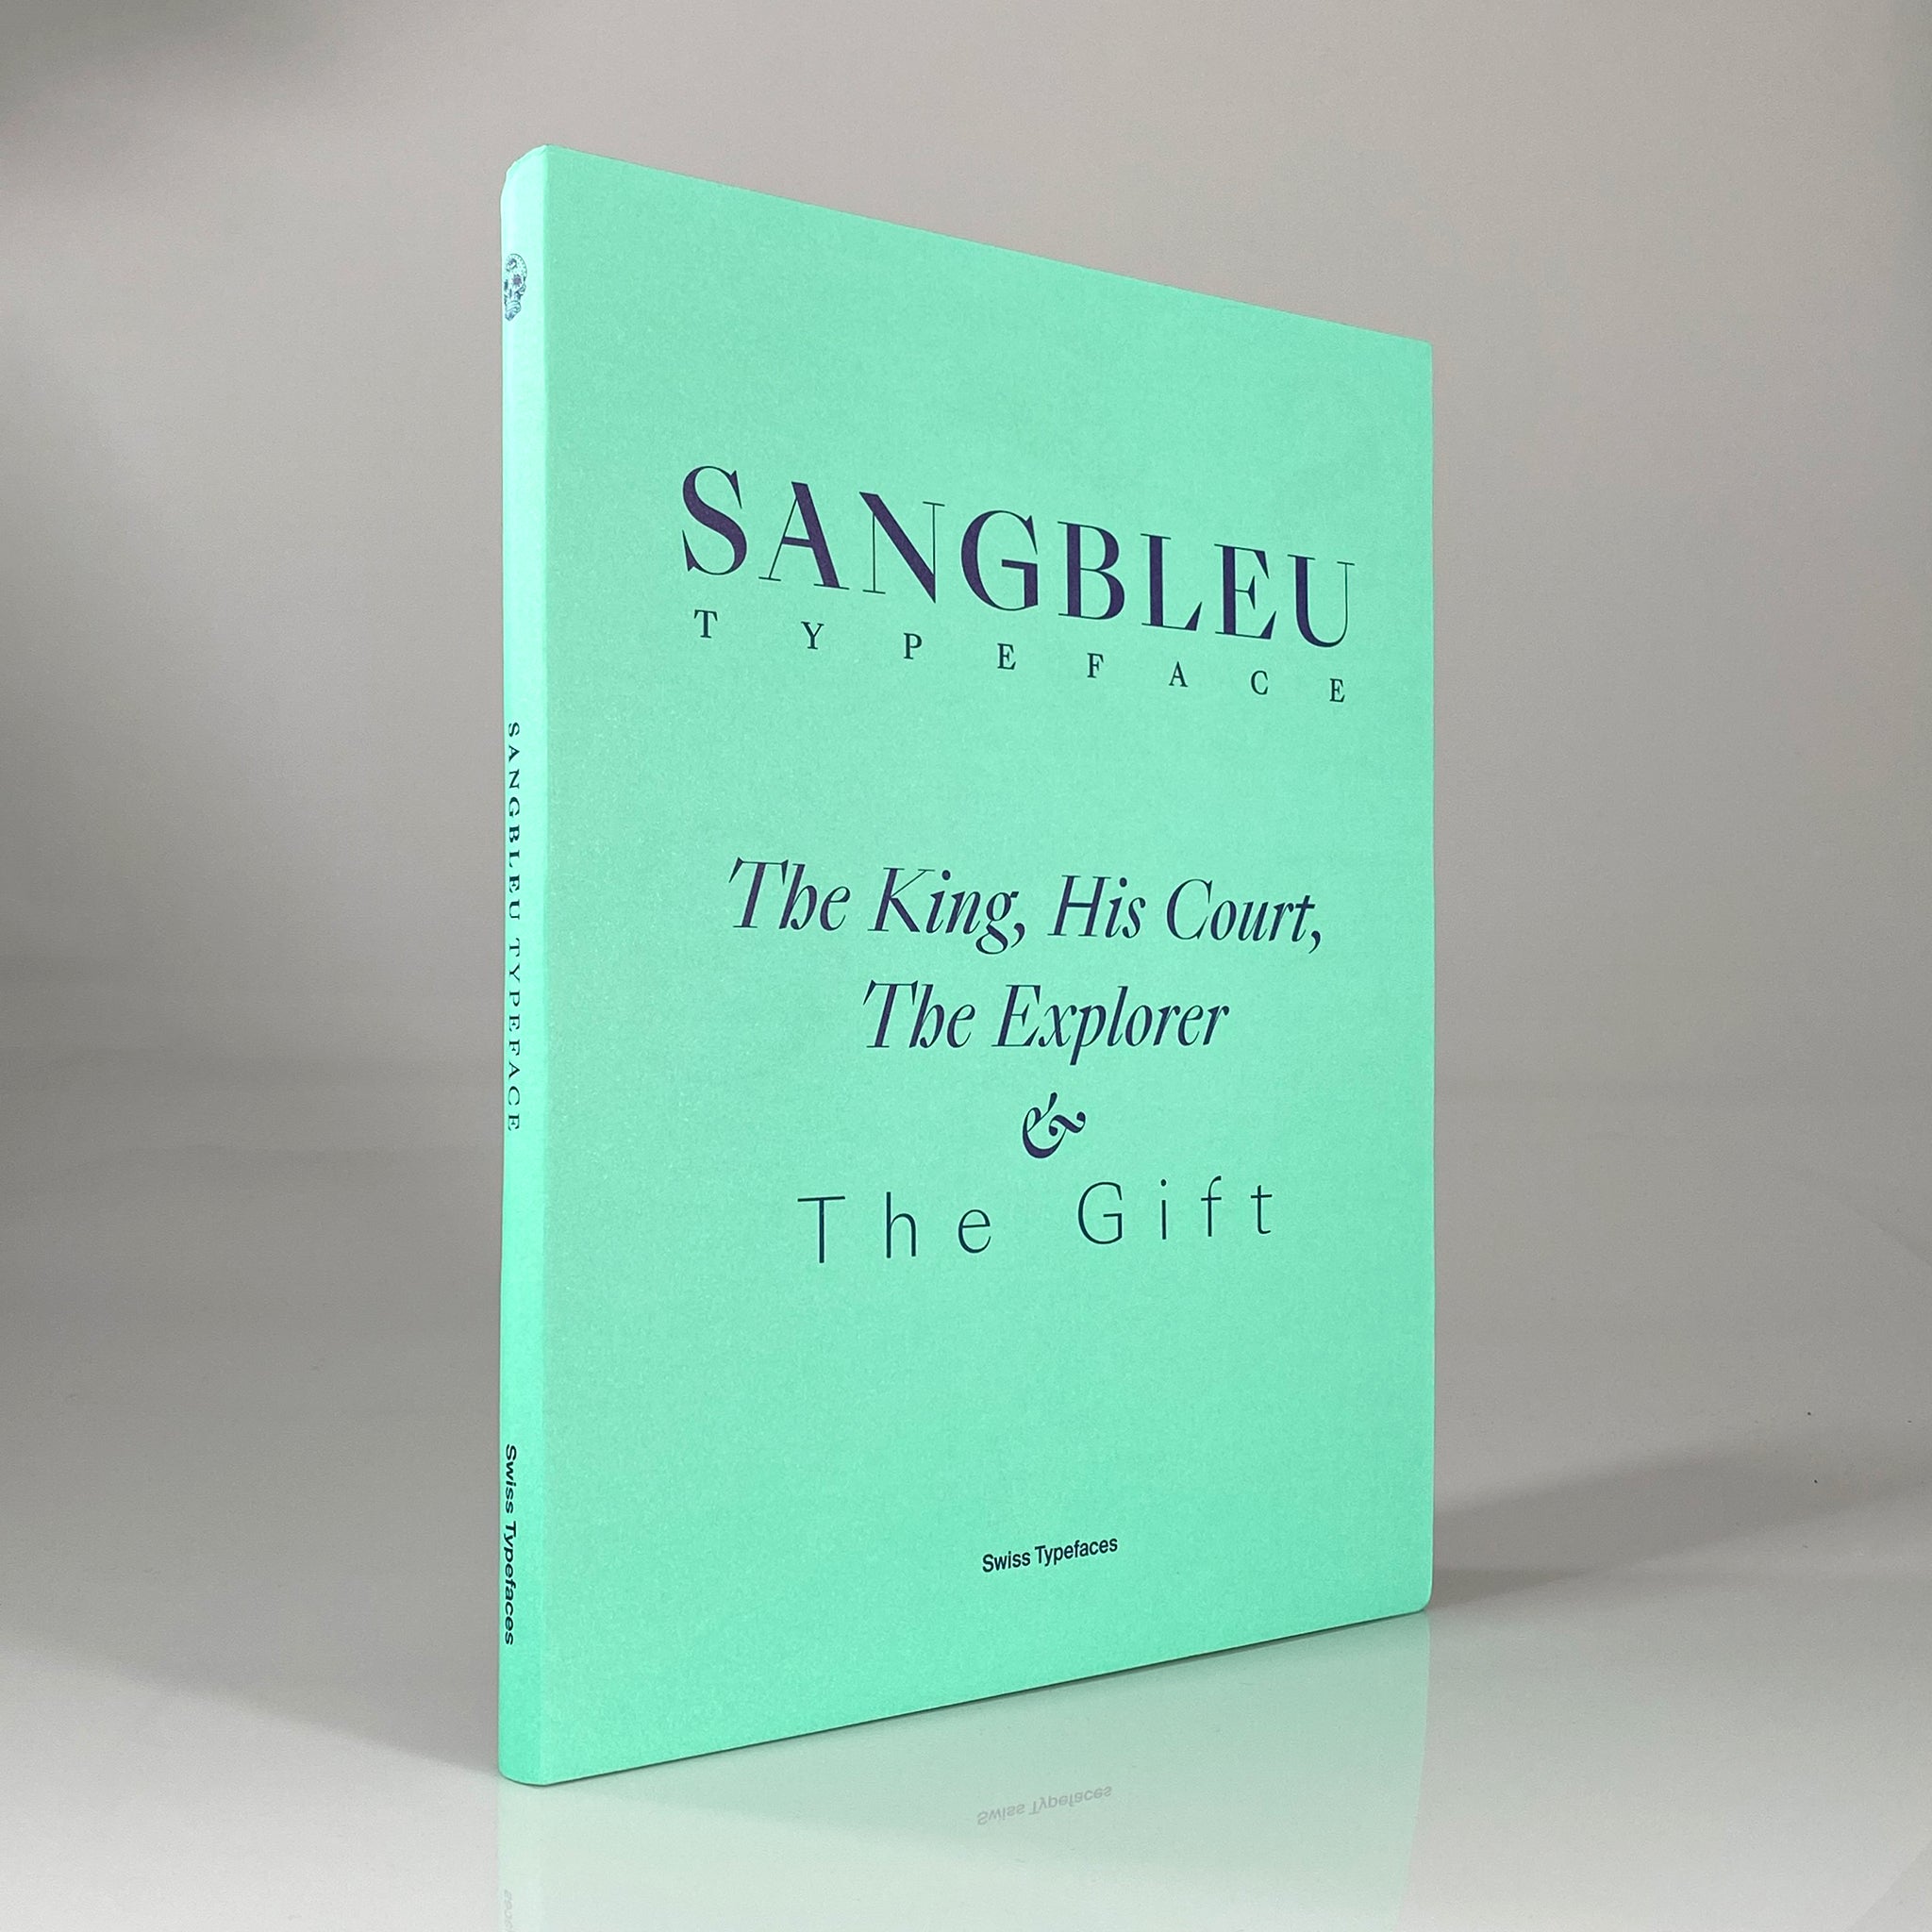 SangBleu Typeface: The King, His Court, The Explorer & The Gift